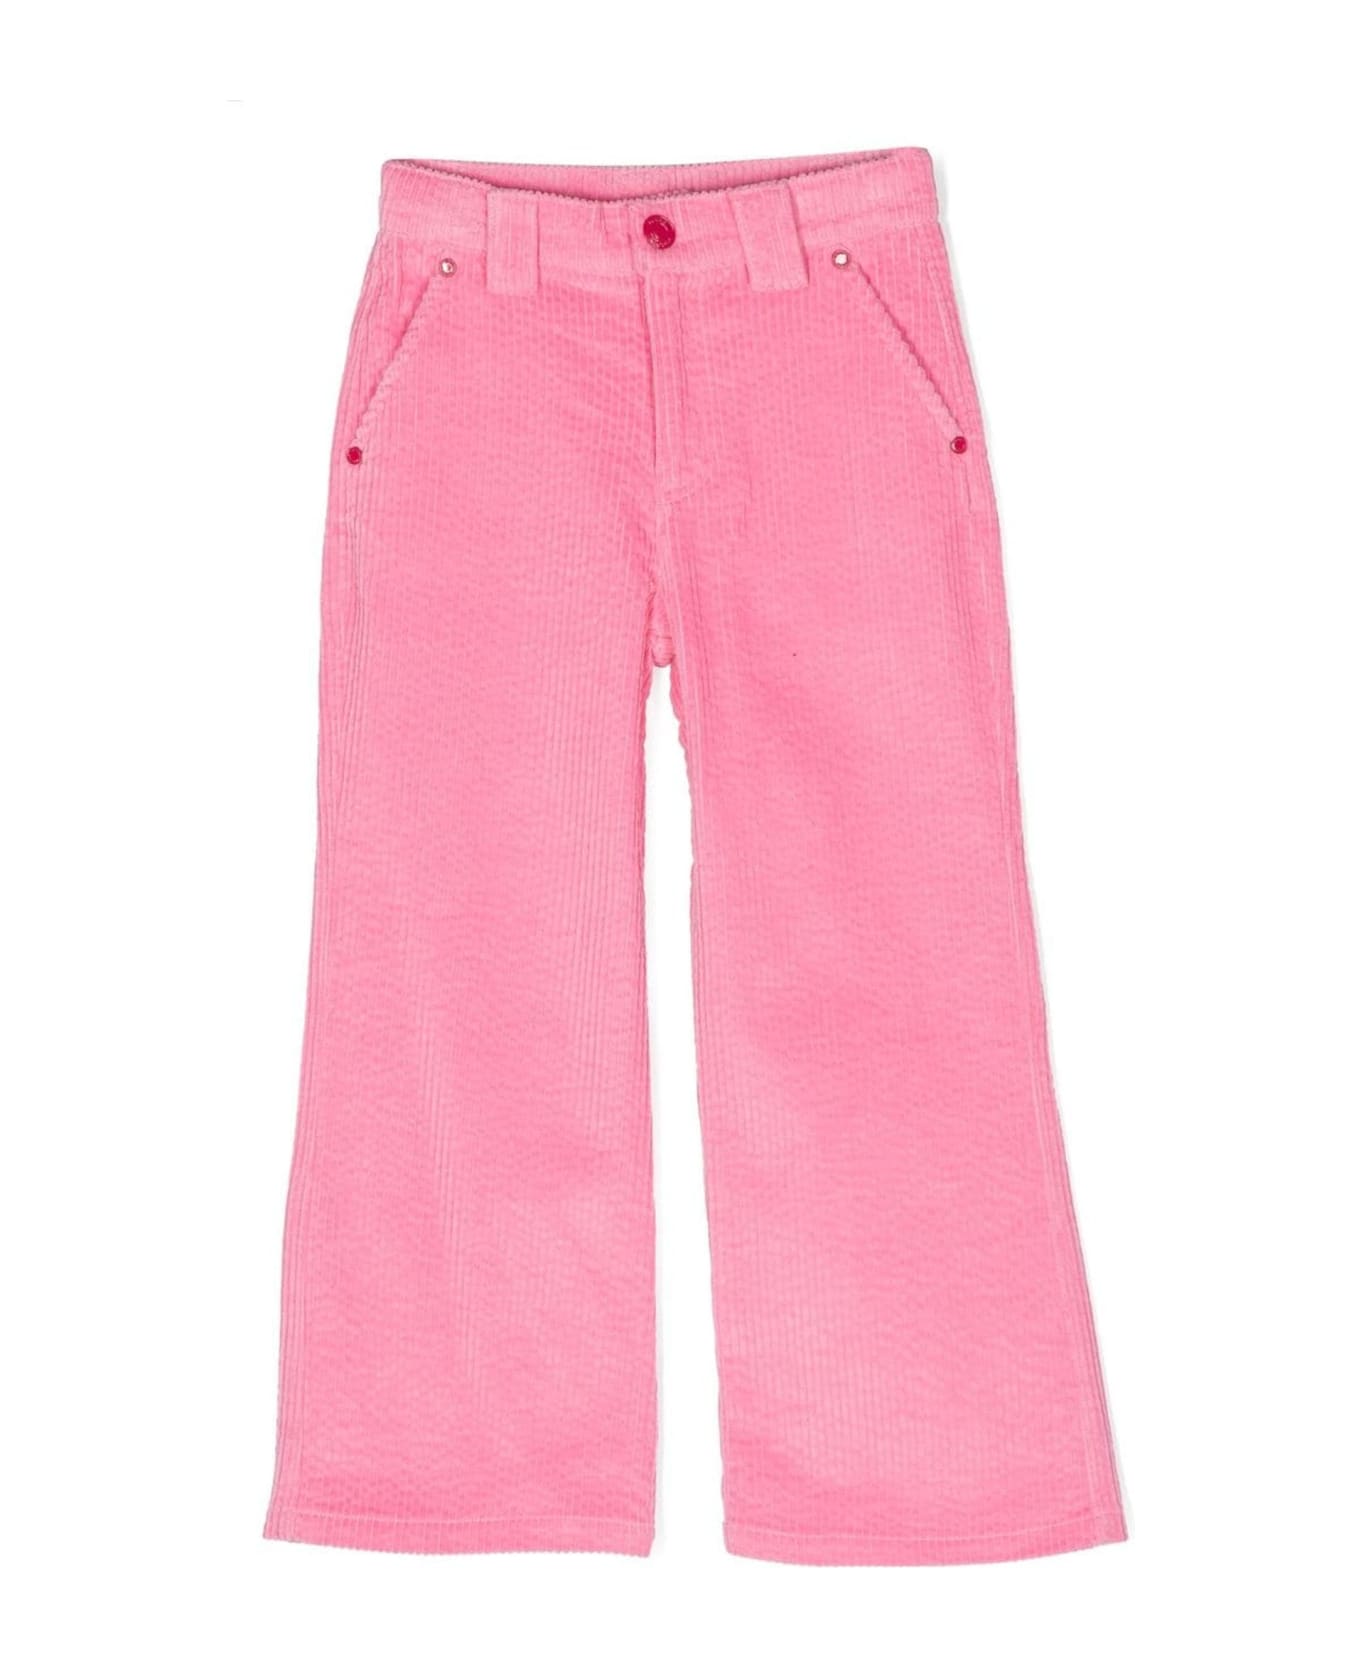 Little Marc Jacobs Pink Cotton Corduroy Trousers - G Albicocca ボトムス